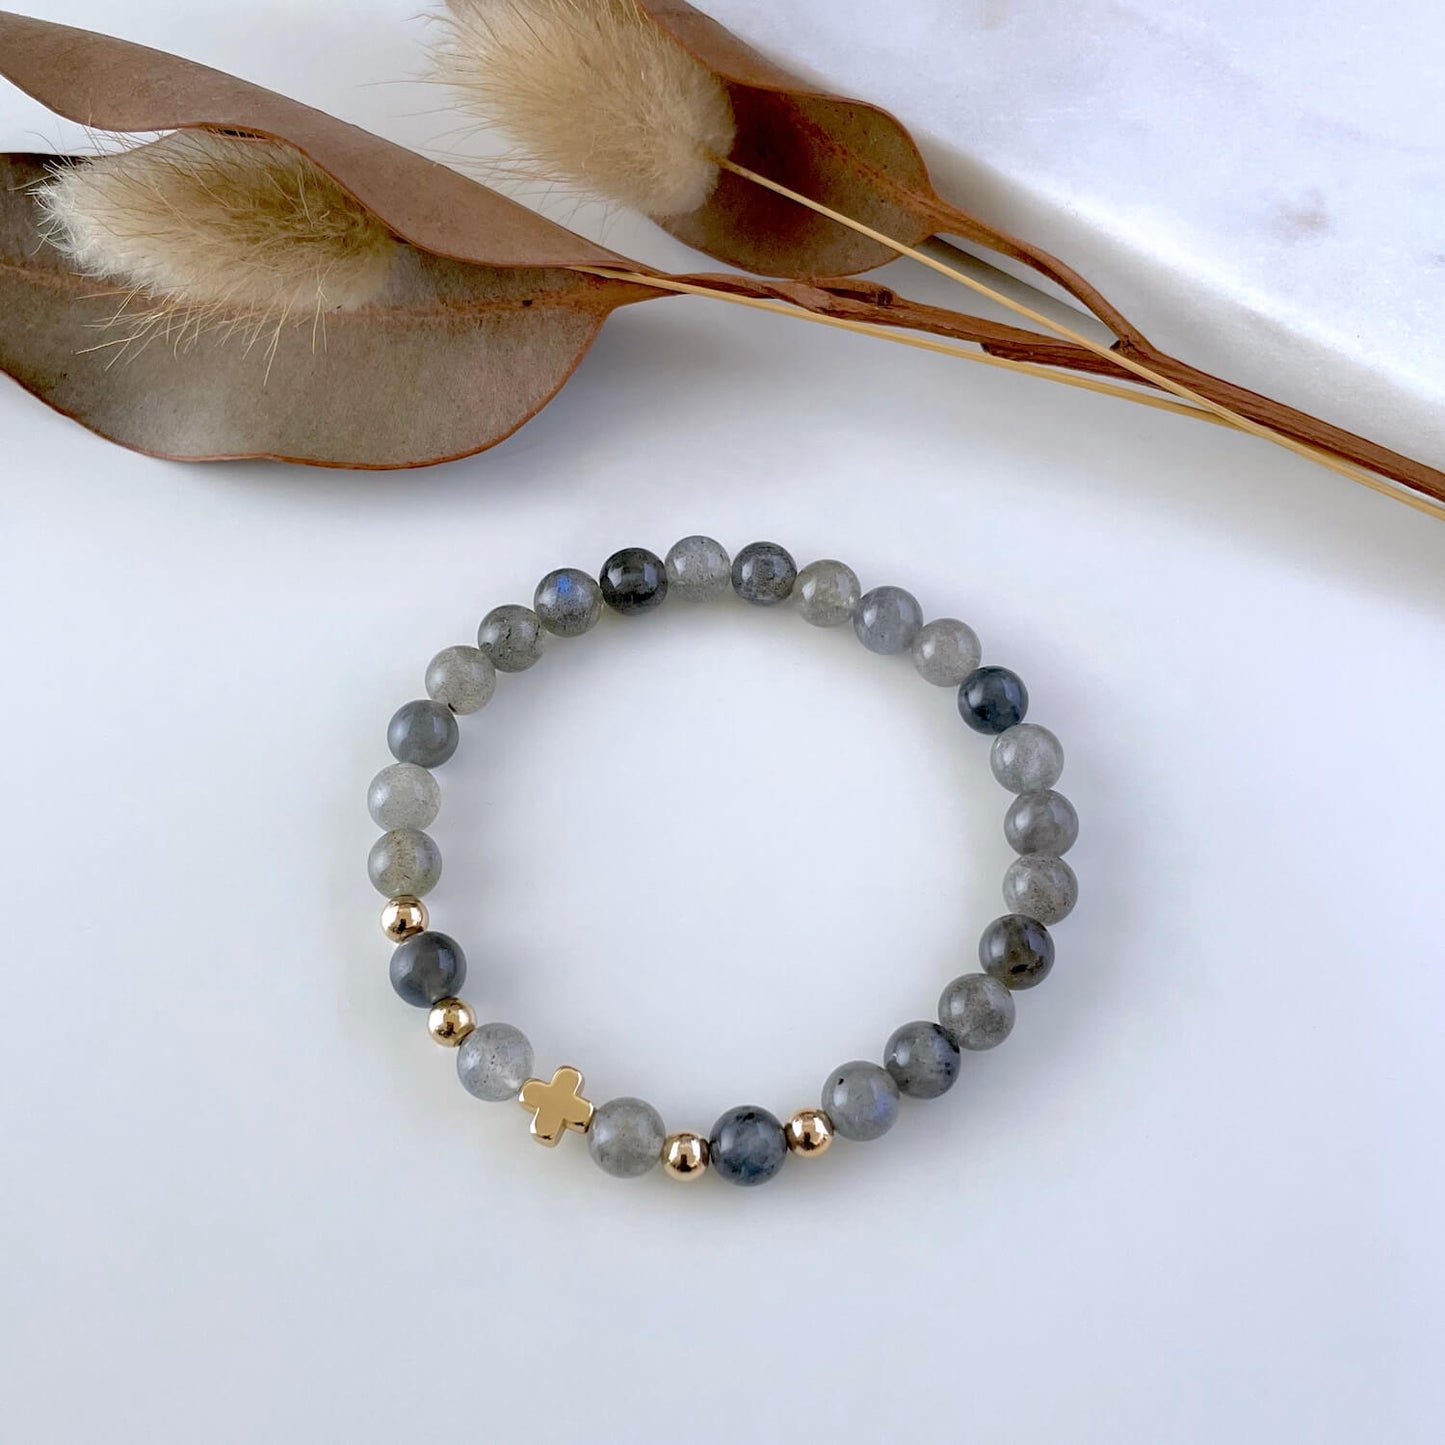 Labradorite Bracelet for Aura protection (Certified) - Crystals Store